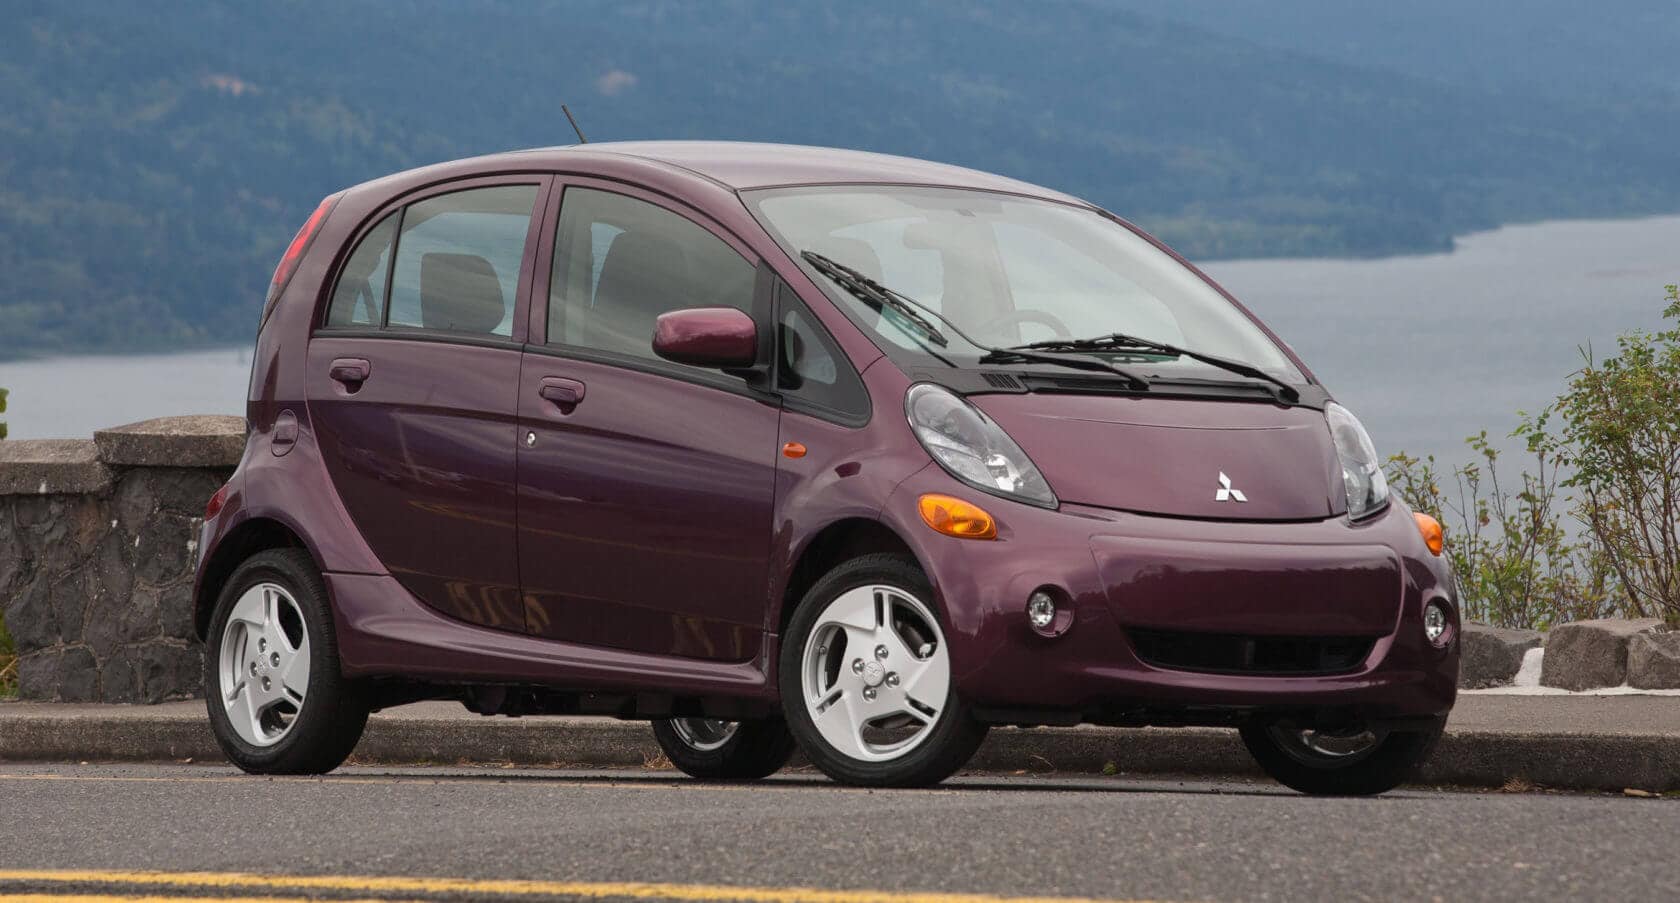 Mitsubishi i Electric Car Officially Released in Hawaii Greener Ideal